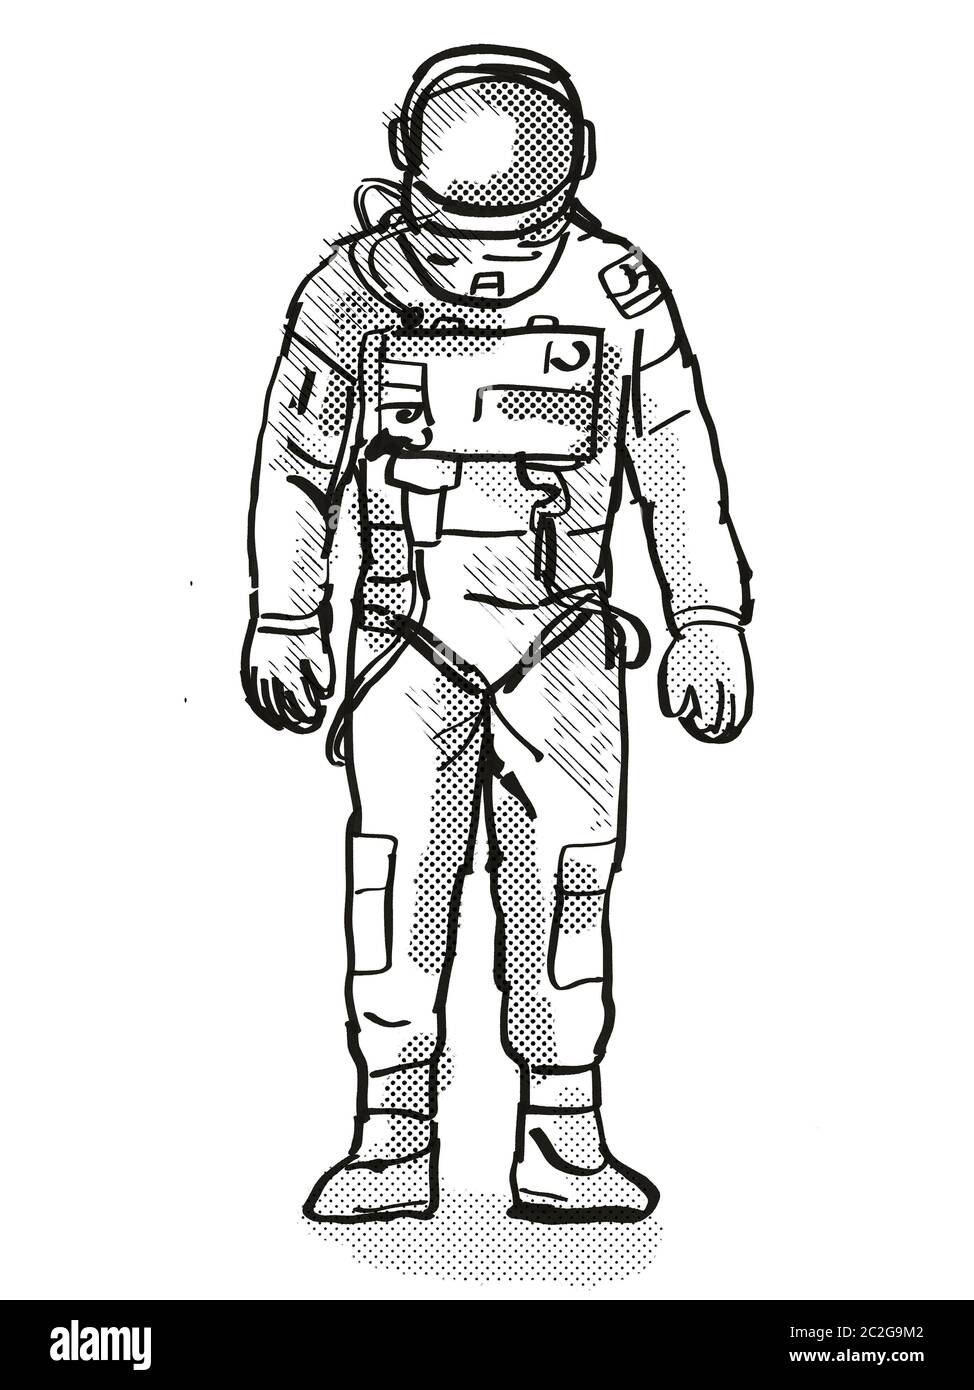 Buy > astronaut outfit drawing > in stock